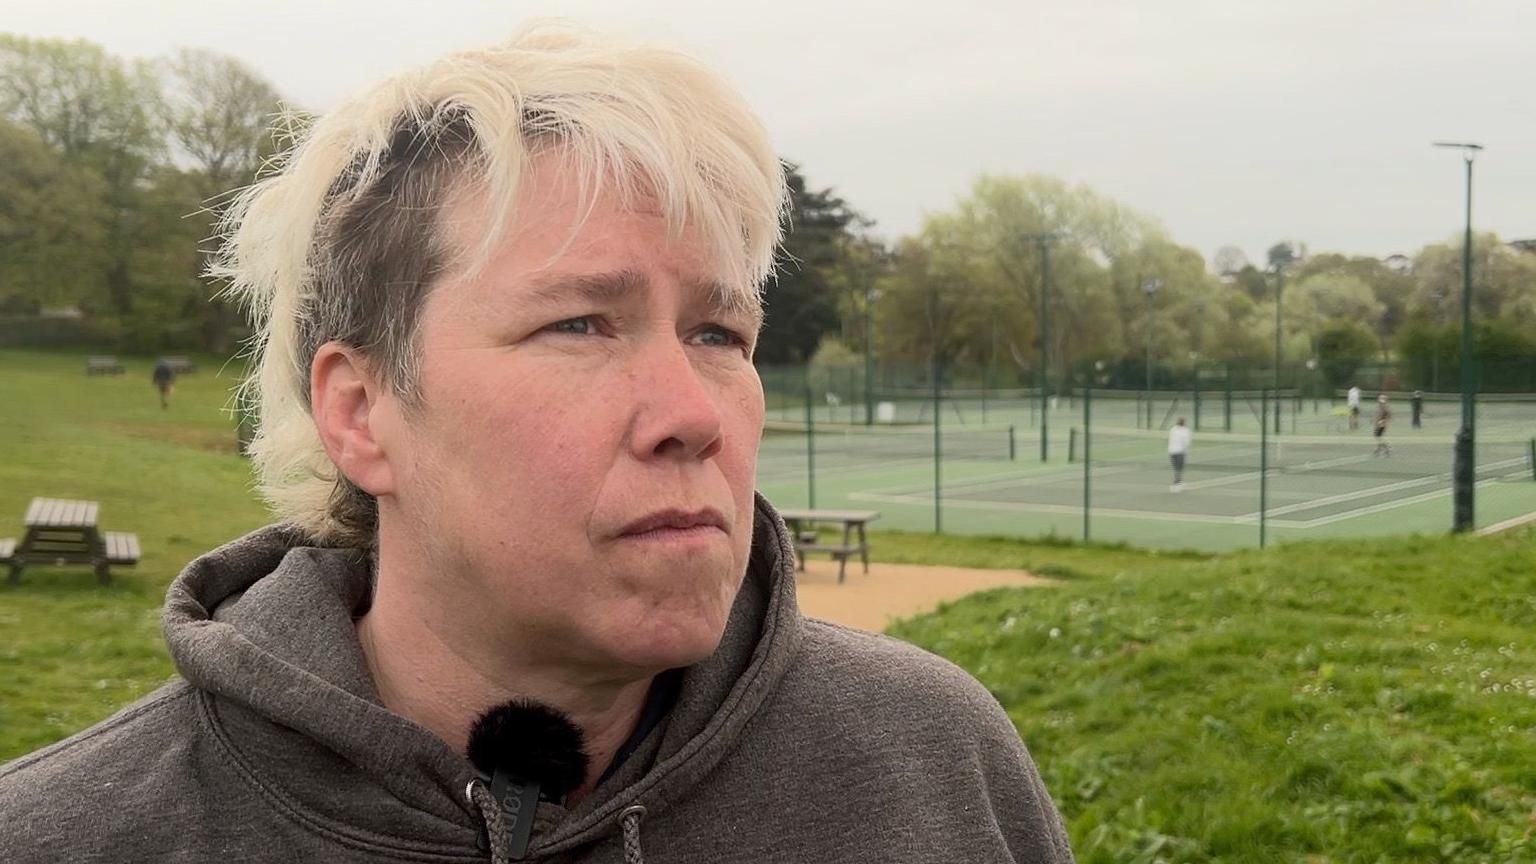 Carolyn Job stands with tennis courts behind her